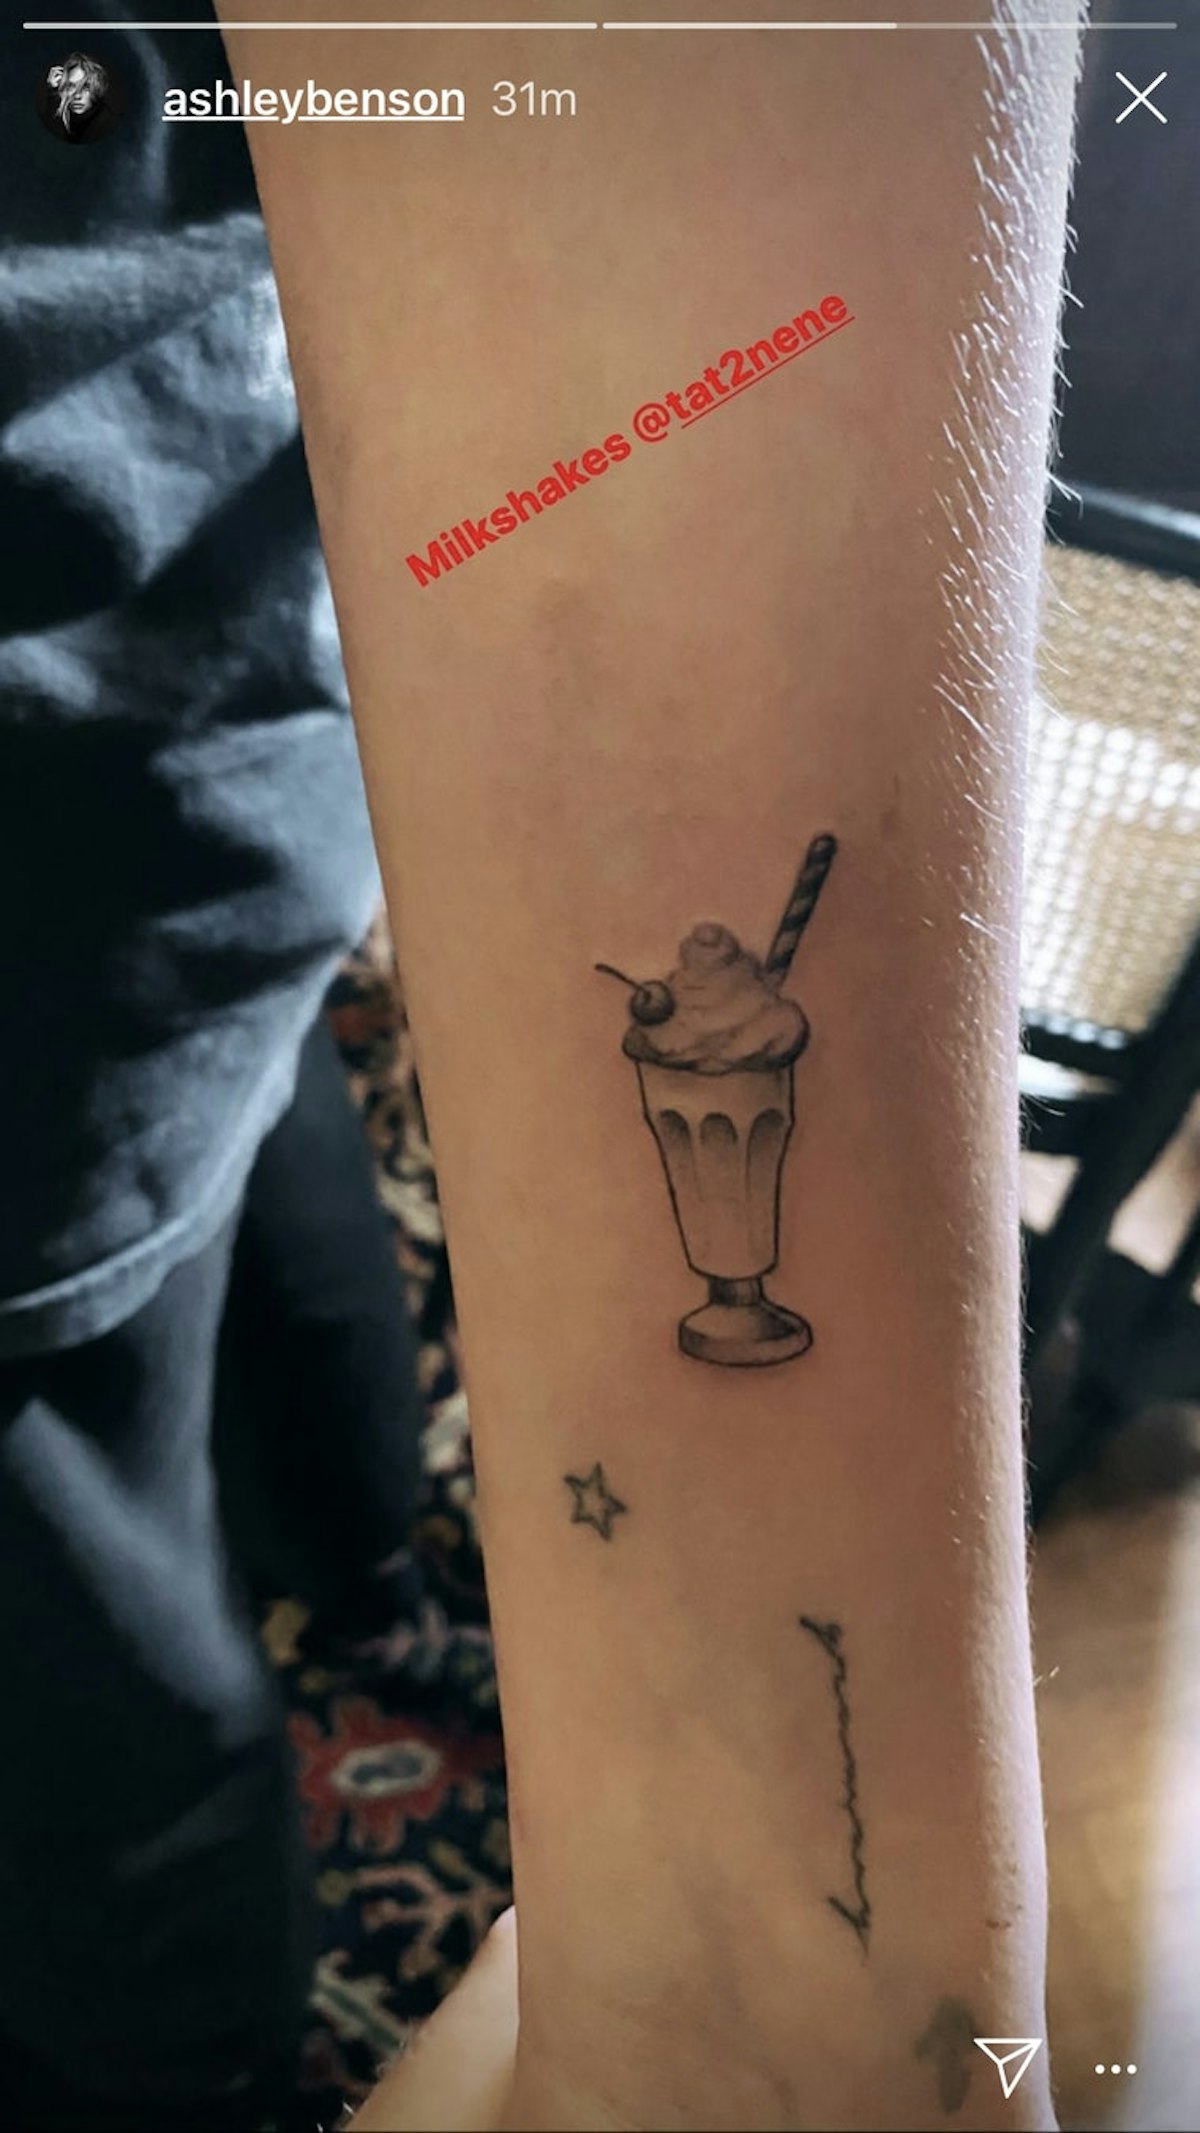 Ashley Benson's milkshake tattoo is not her only food-themed piece.